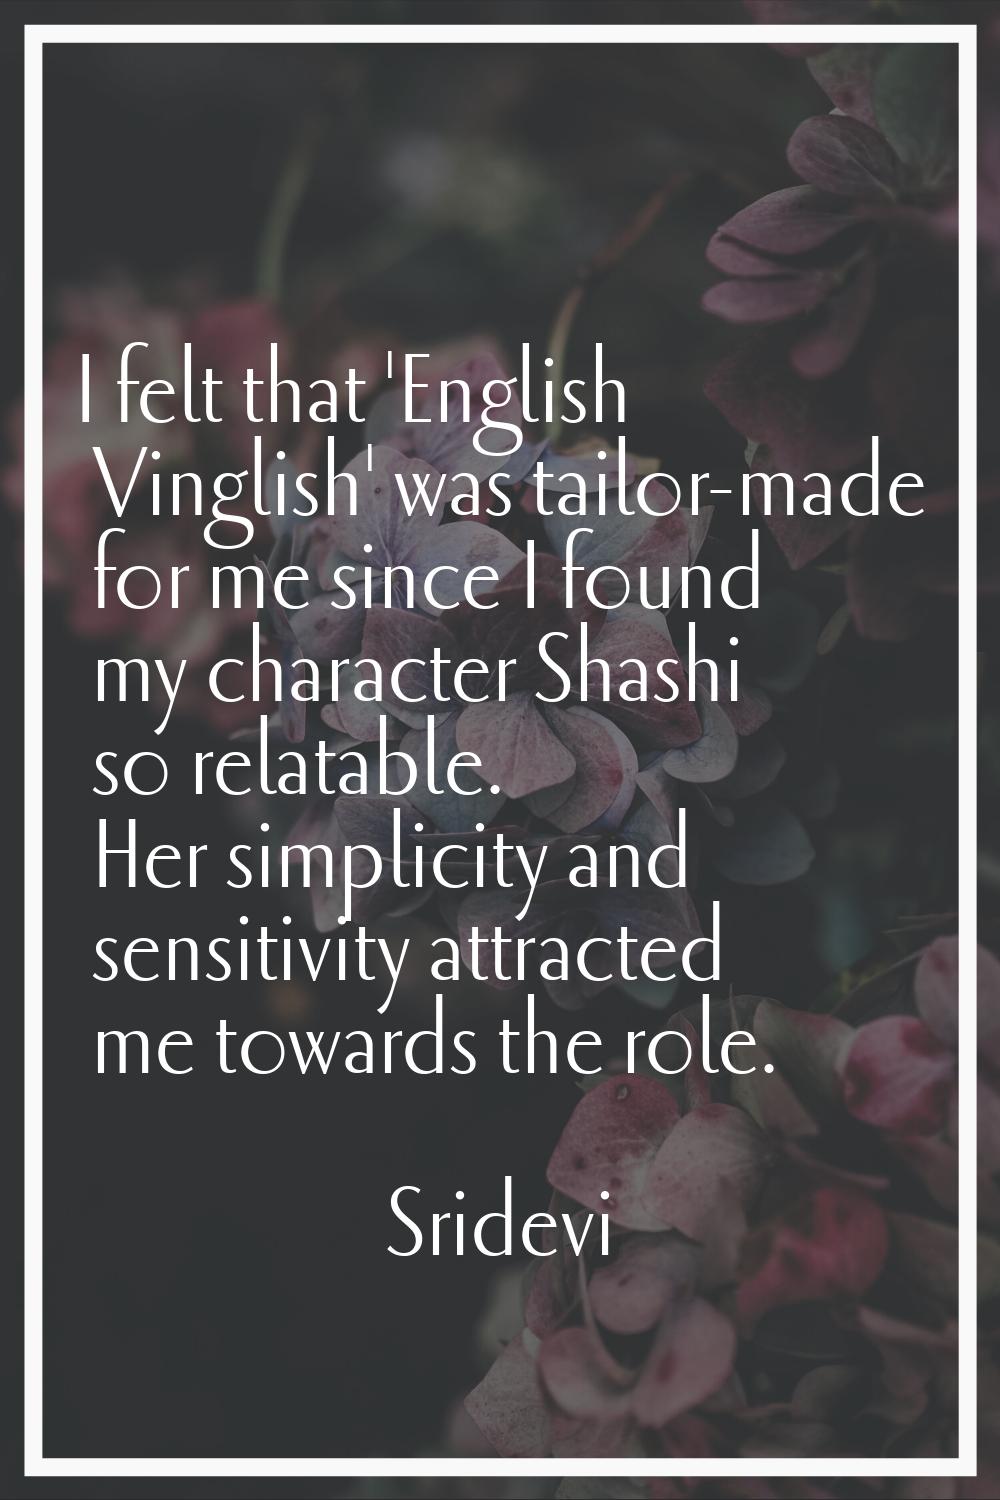 I felt that 'English Vinglish' was tailor-made for me since I found my character Shashi so relatabl